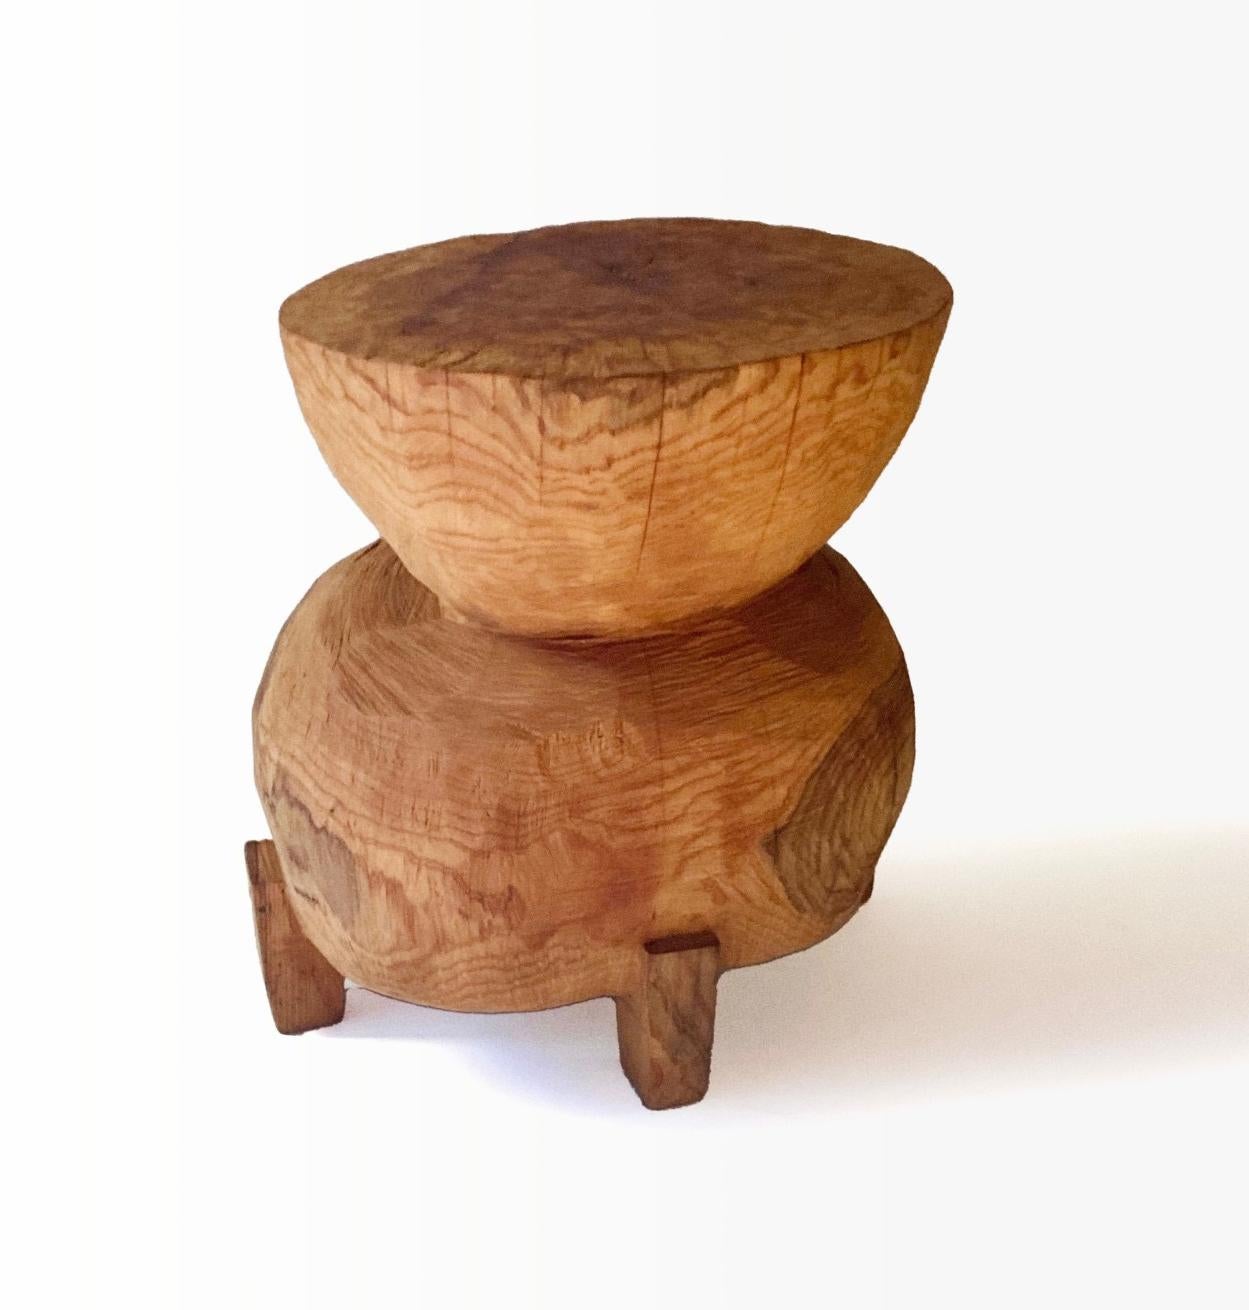 Name: Miminashi
Sculptural stool by Hiroyuki Nishimura and Zougei carved furniture
Material: Cherry
This work is carved from log with some kinds of chainsaws.
Most of wood used for Nishimura's works are unable to use anything, these woods are